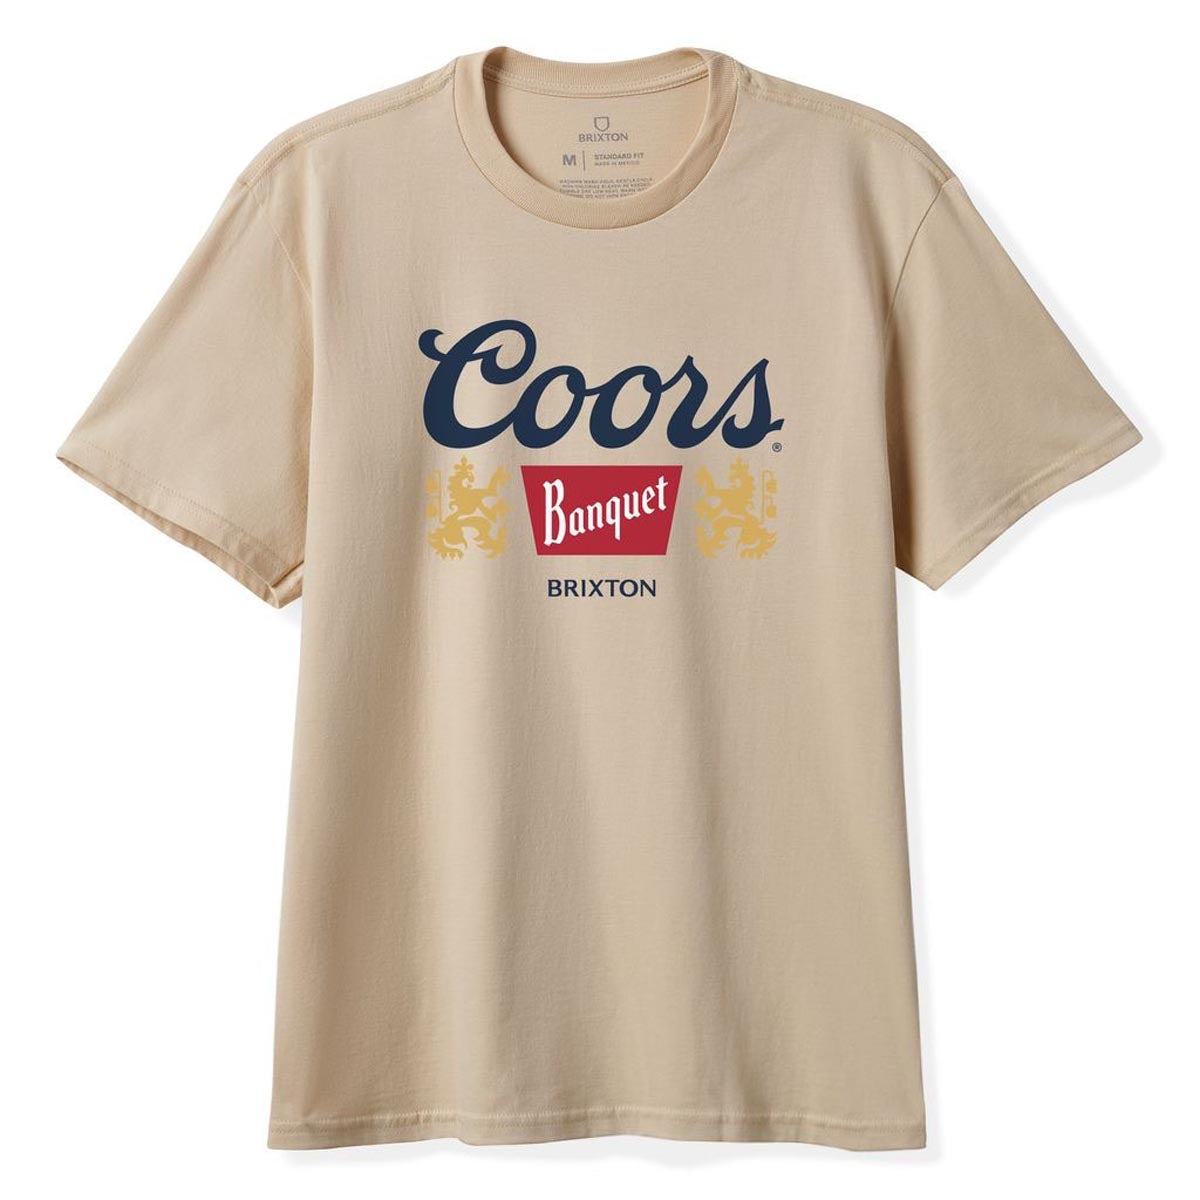 Brixton x Coors Griffin T-Shirt - Cream image 1